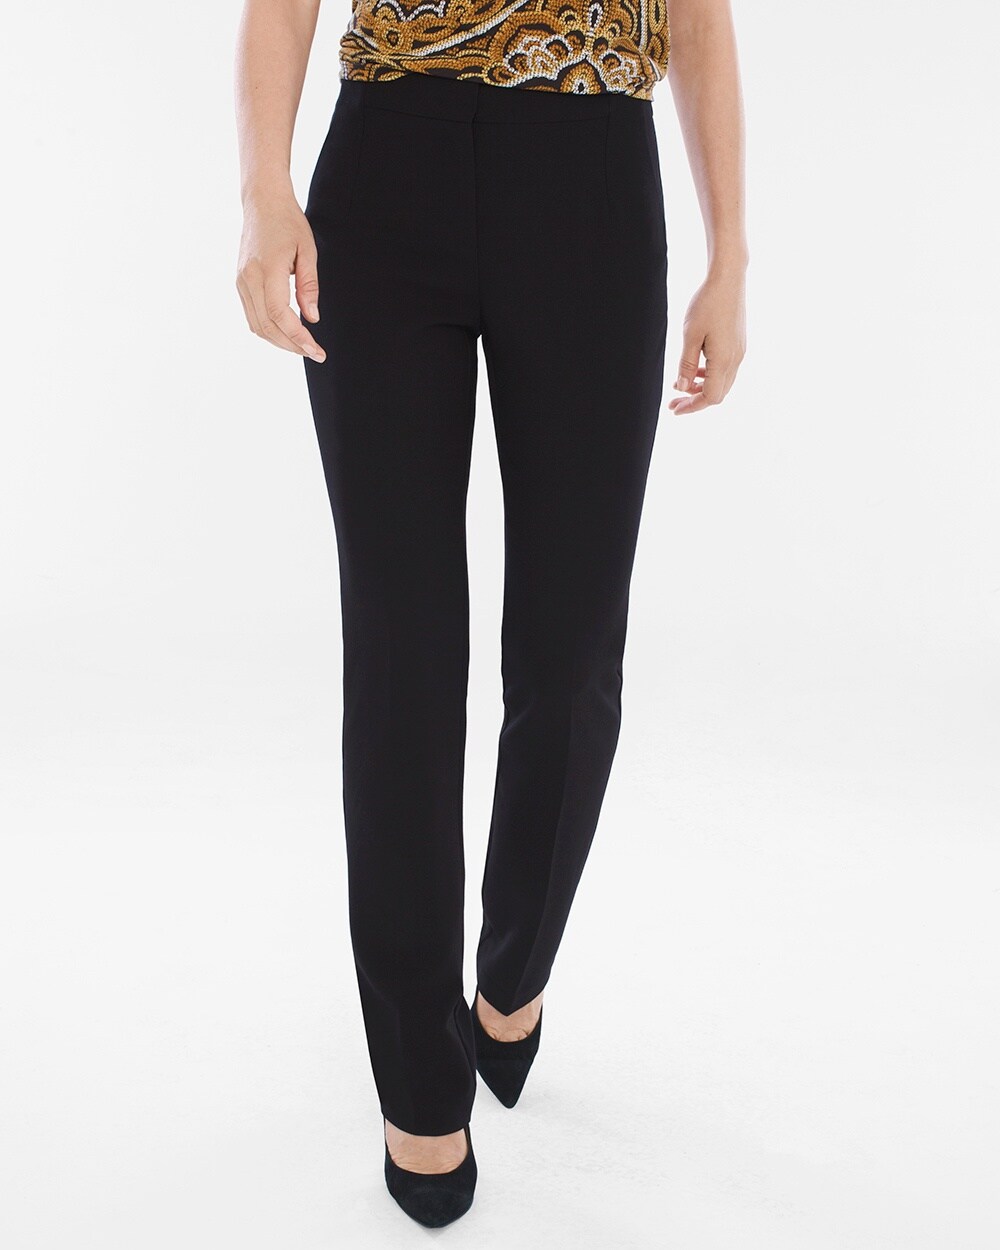 So Slimming Trousers